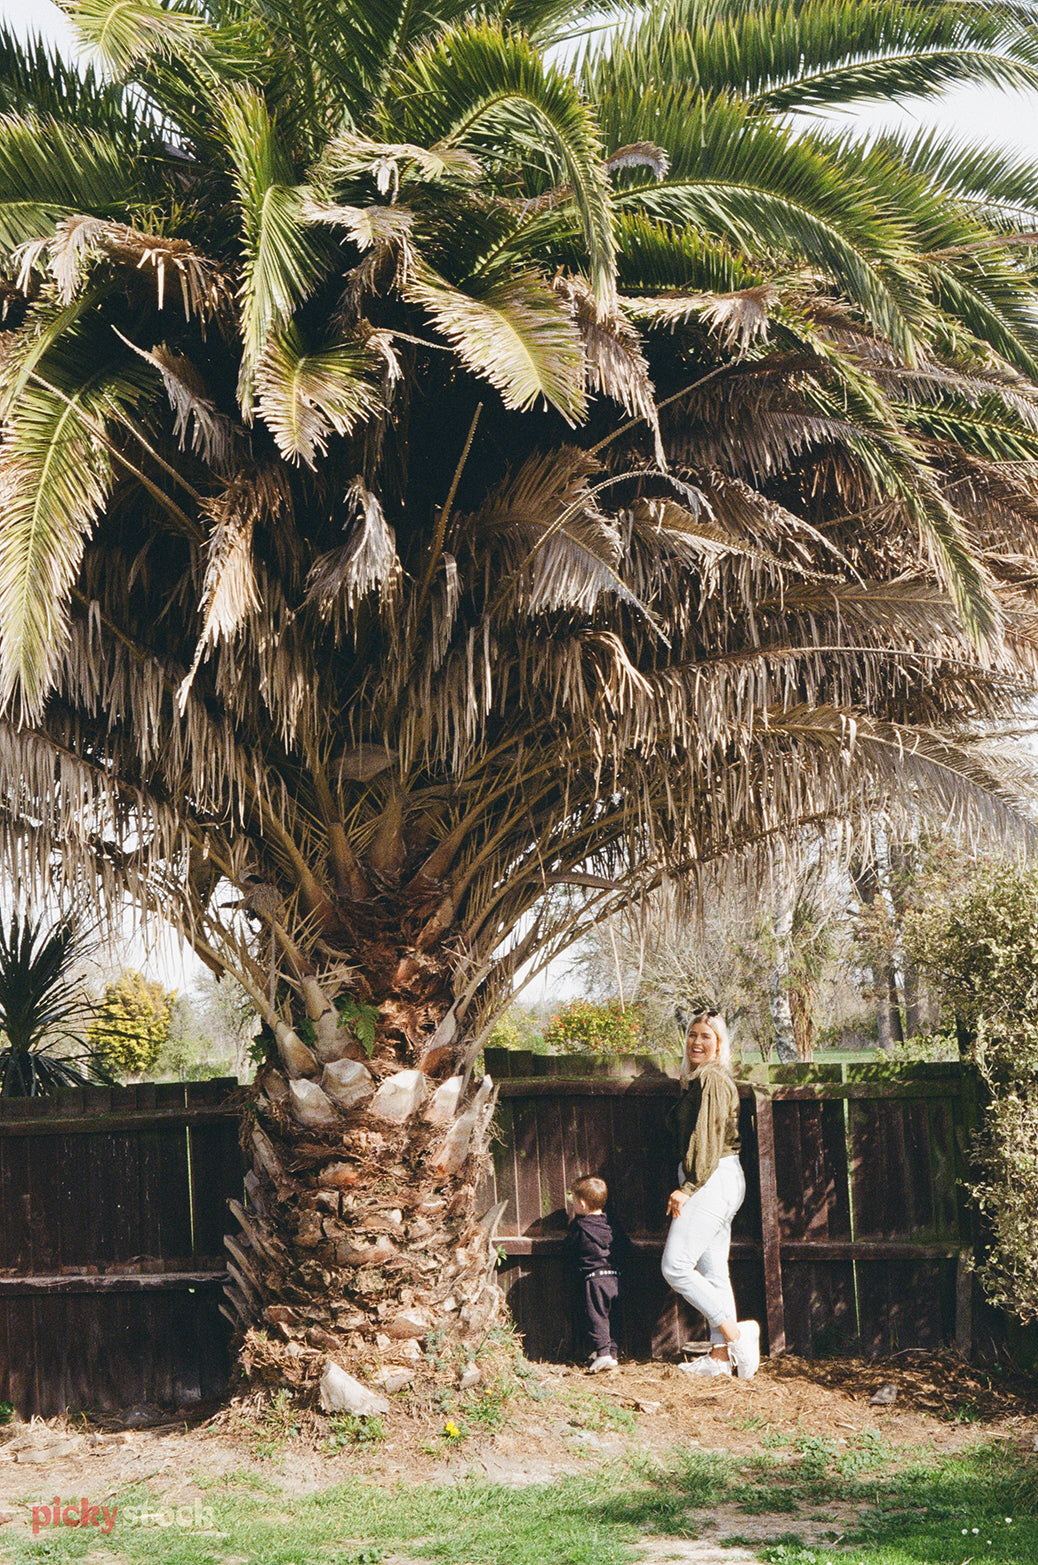 A blonde lady wearing jeans and a nice top laughs as a toddler looks at a large pheonix palm tree. They stand near the back fence behind the tree, of what looks like a backyard. 